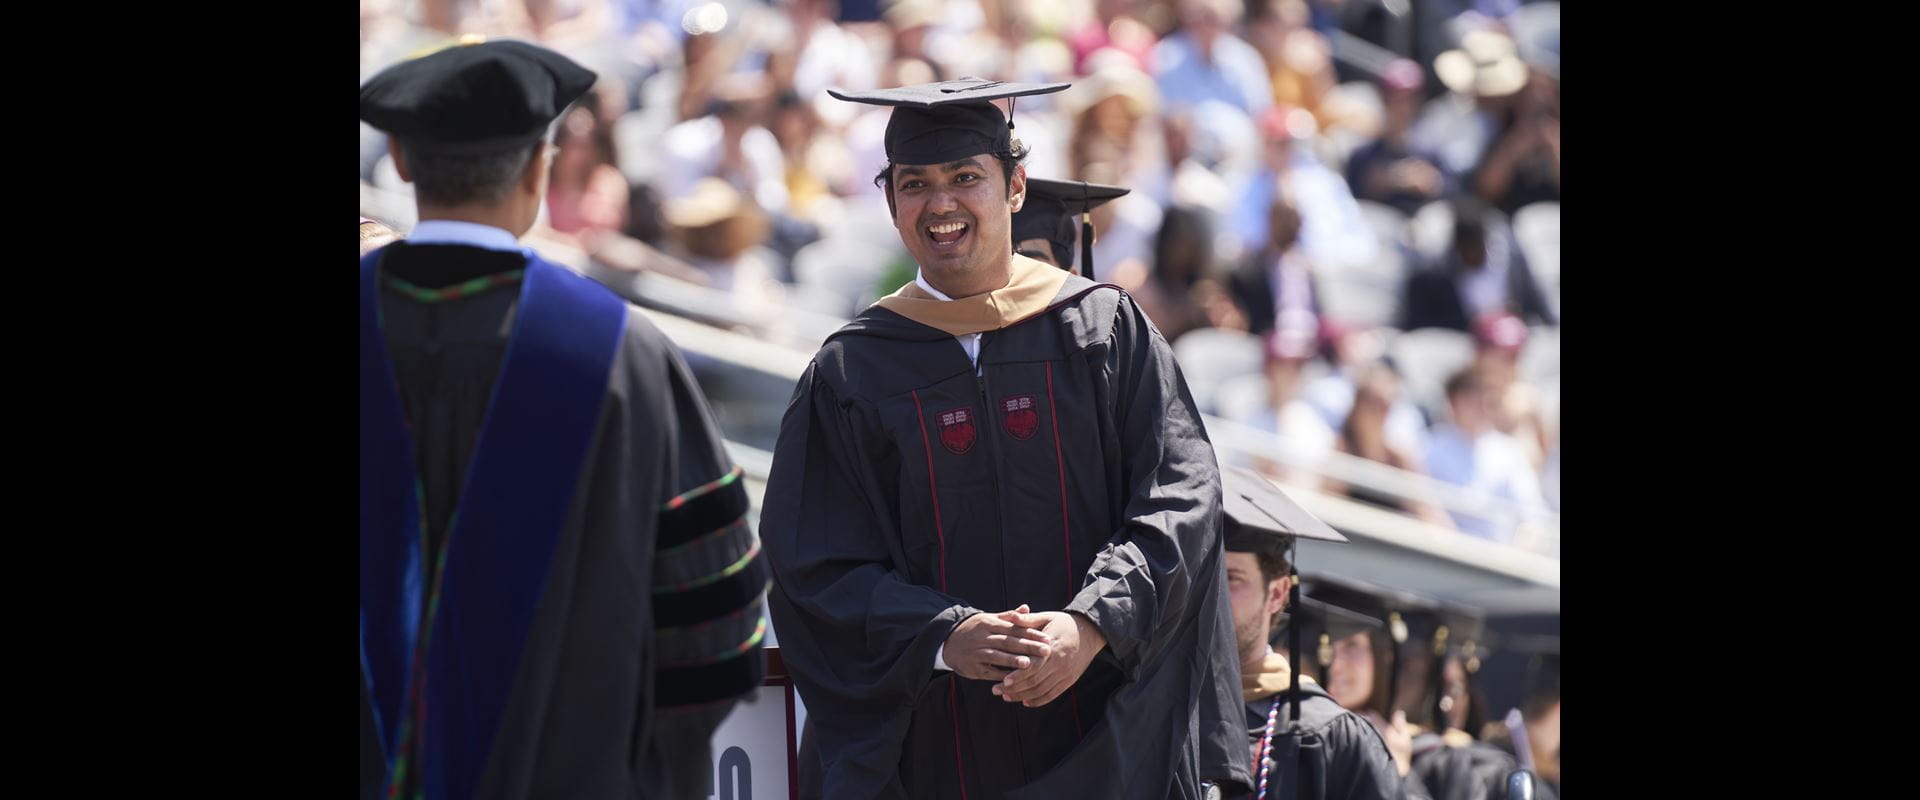 How Long Does It Take to Get an MBA? The University of Chicago Booth